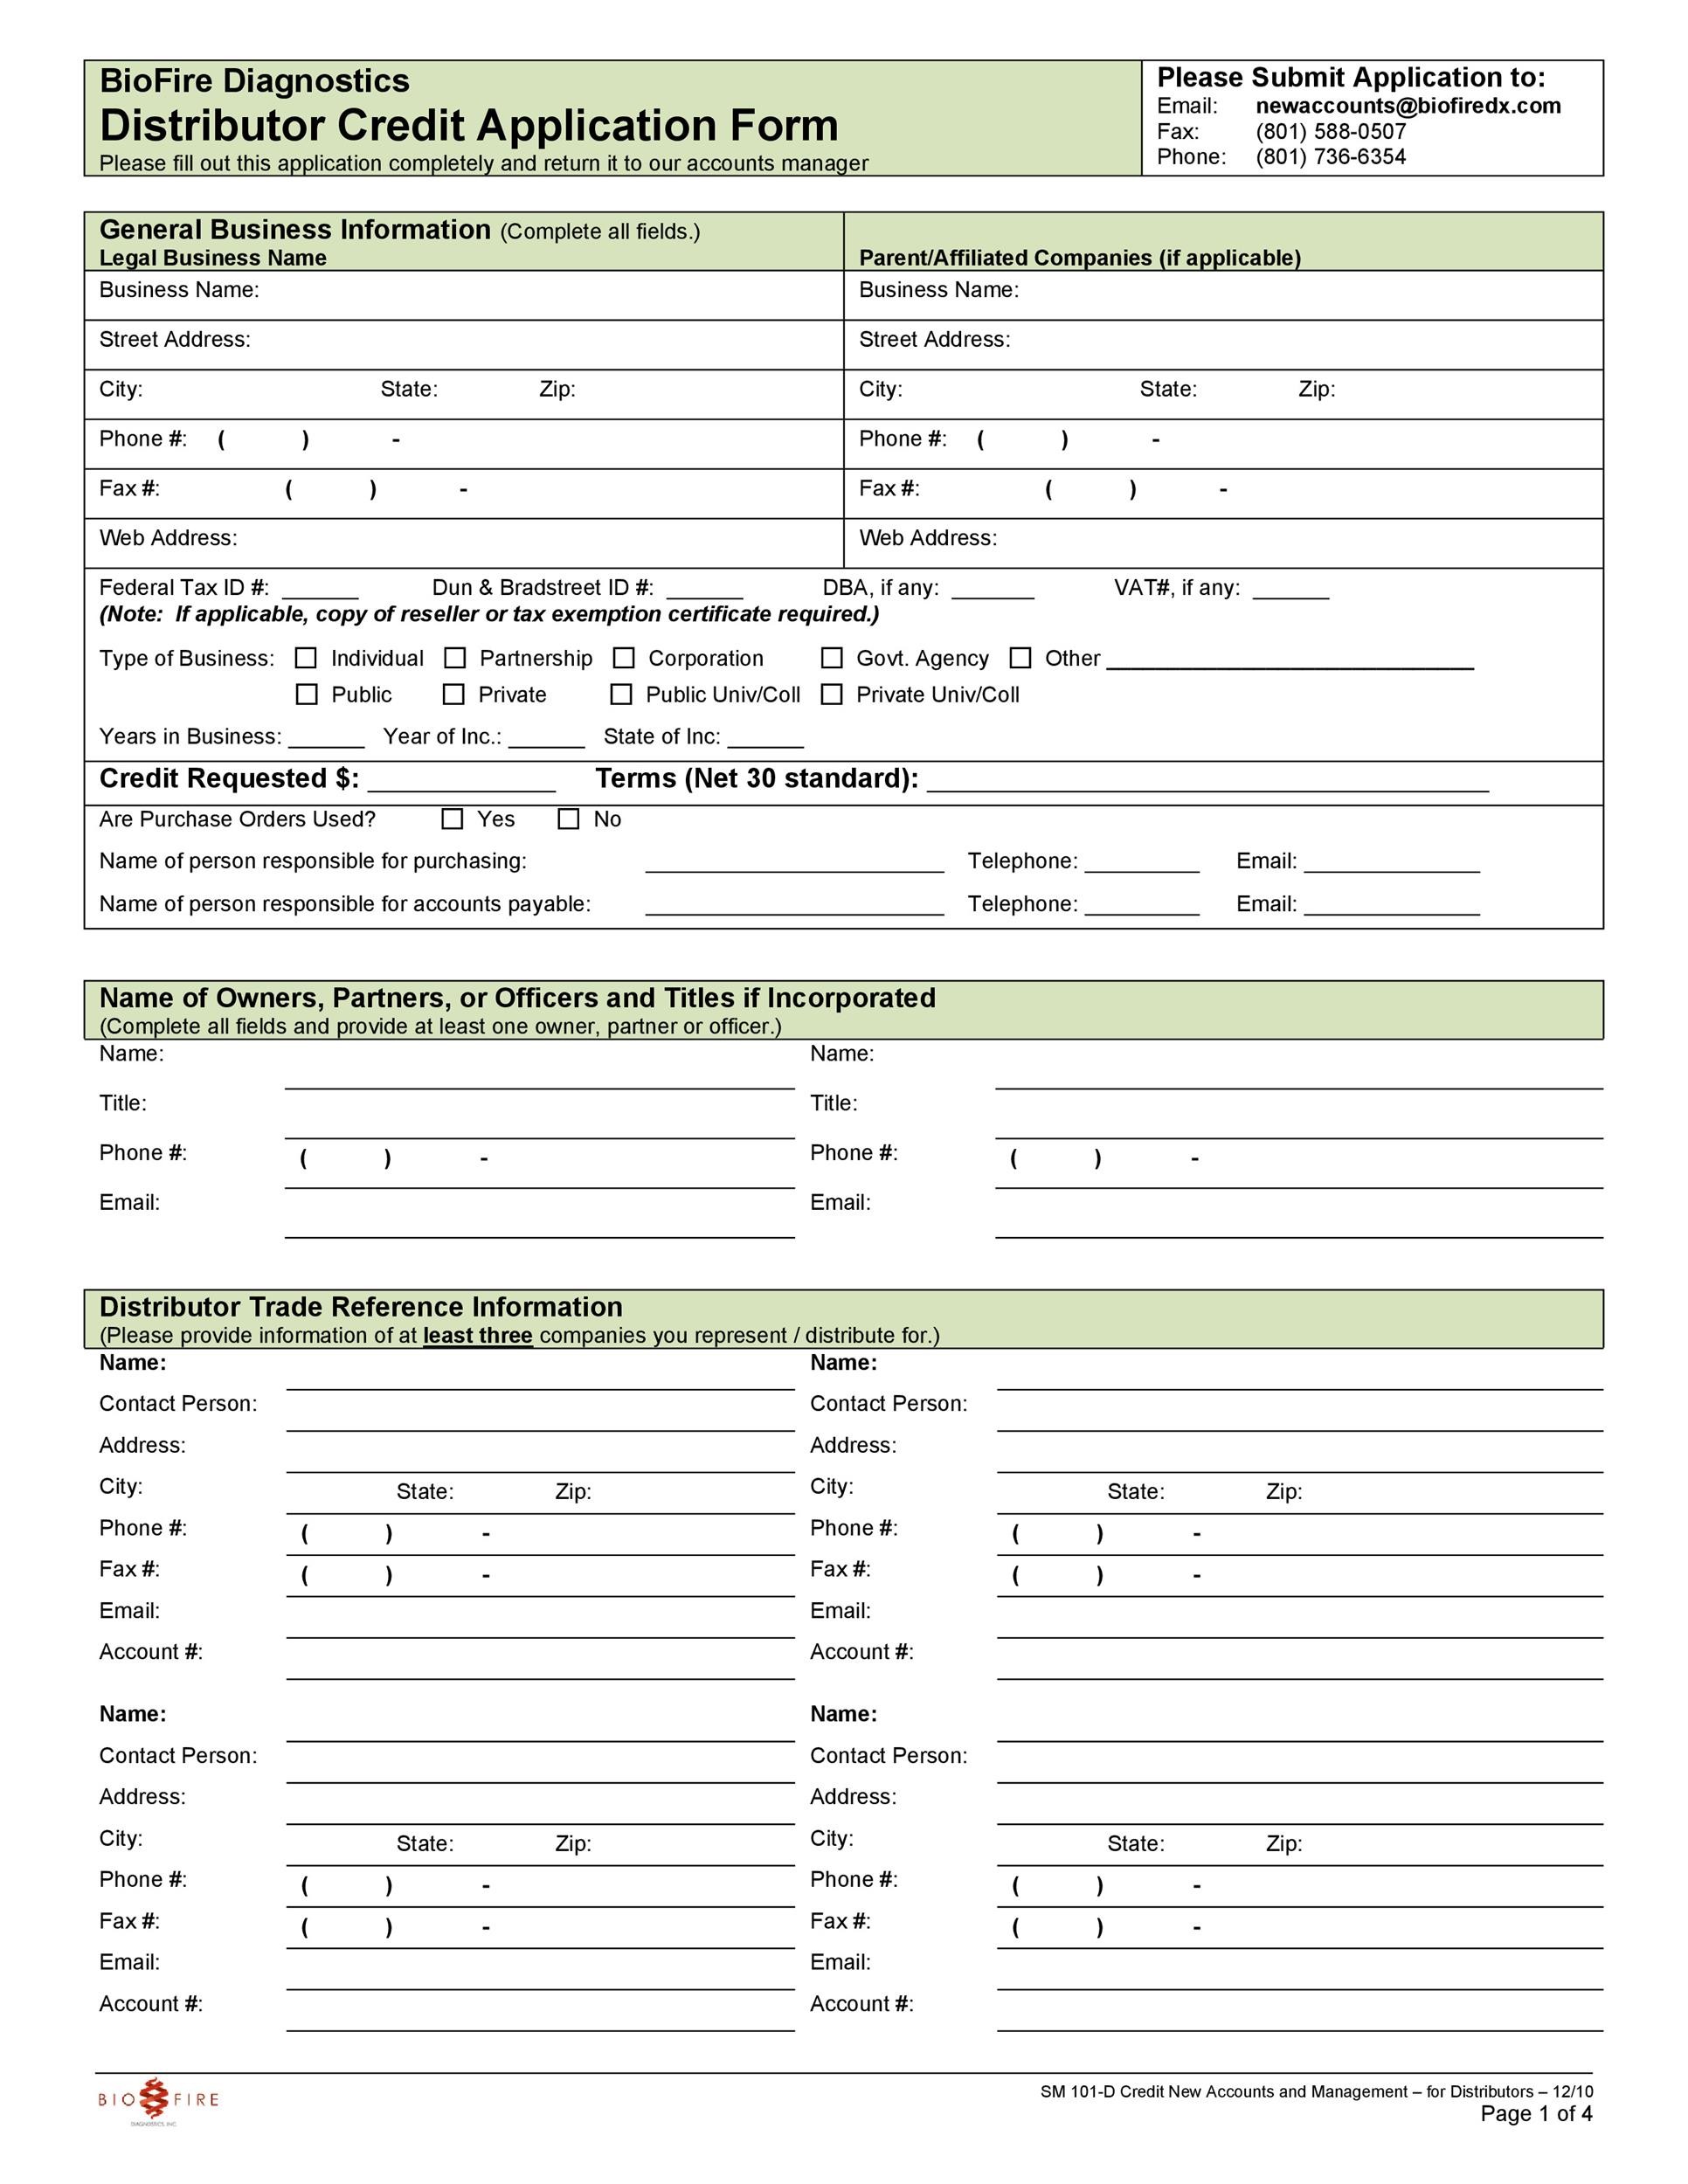 New Customer Form Template Excel from templatelab.com